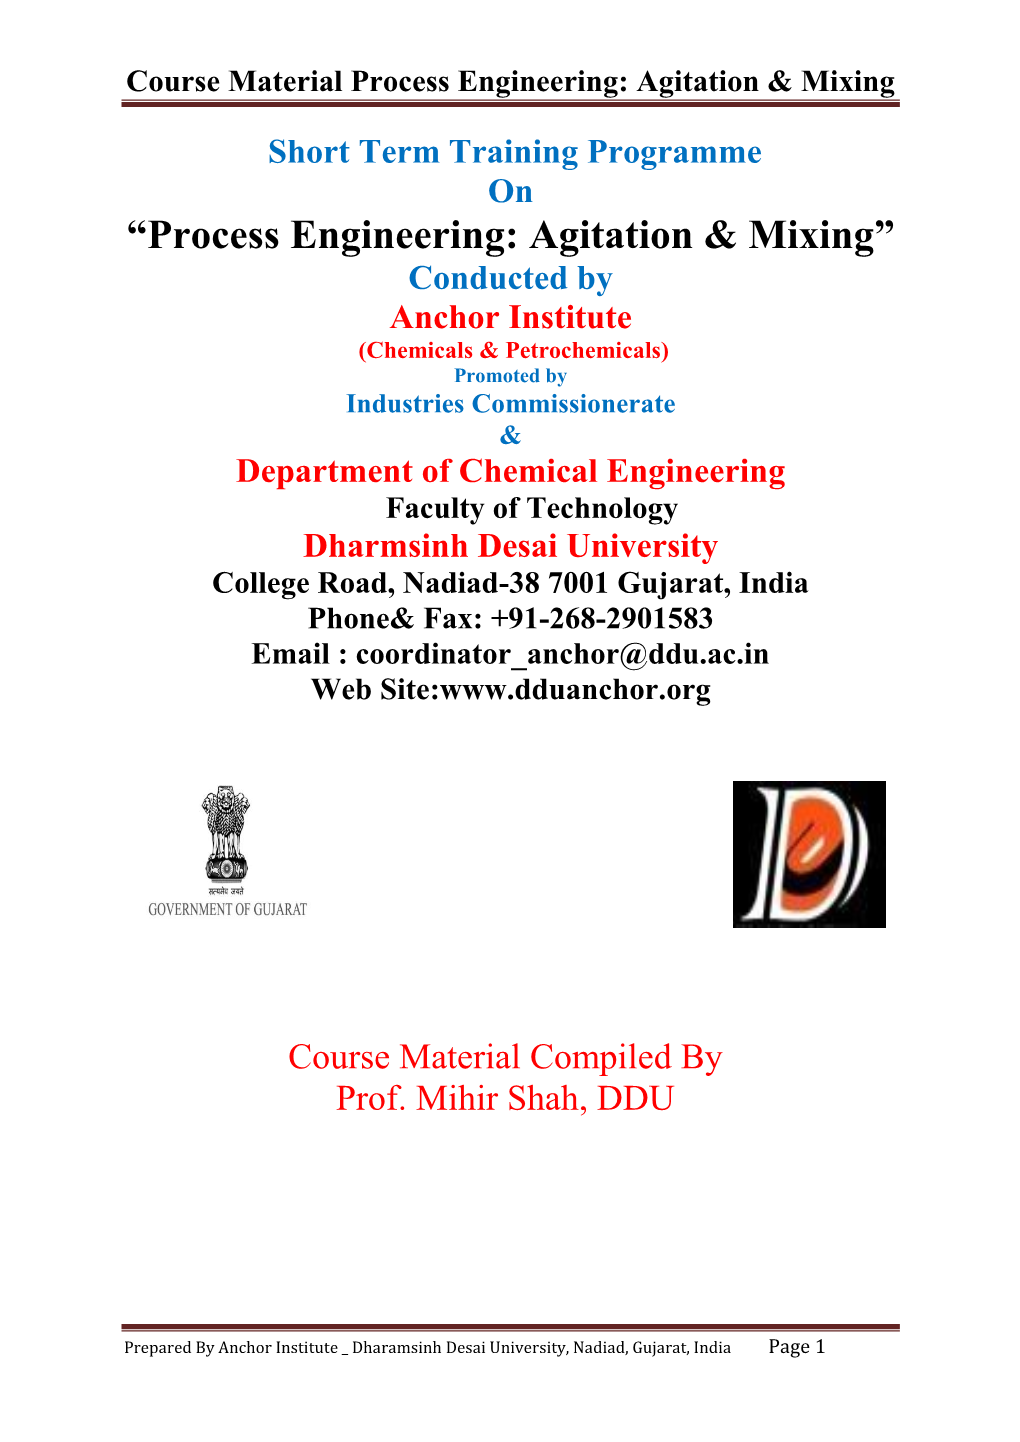 Course Material Process Engineering: Agitation & Mixing